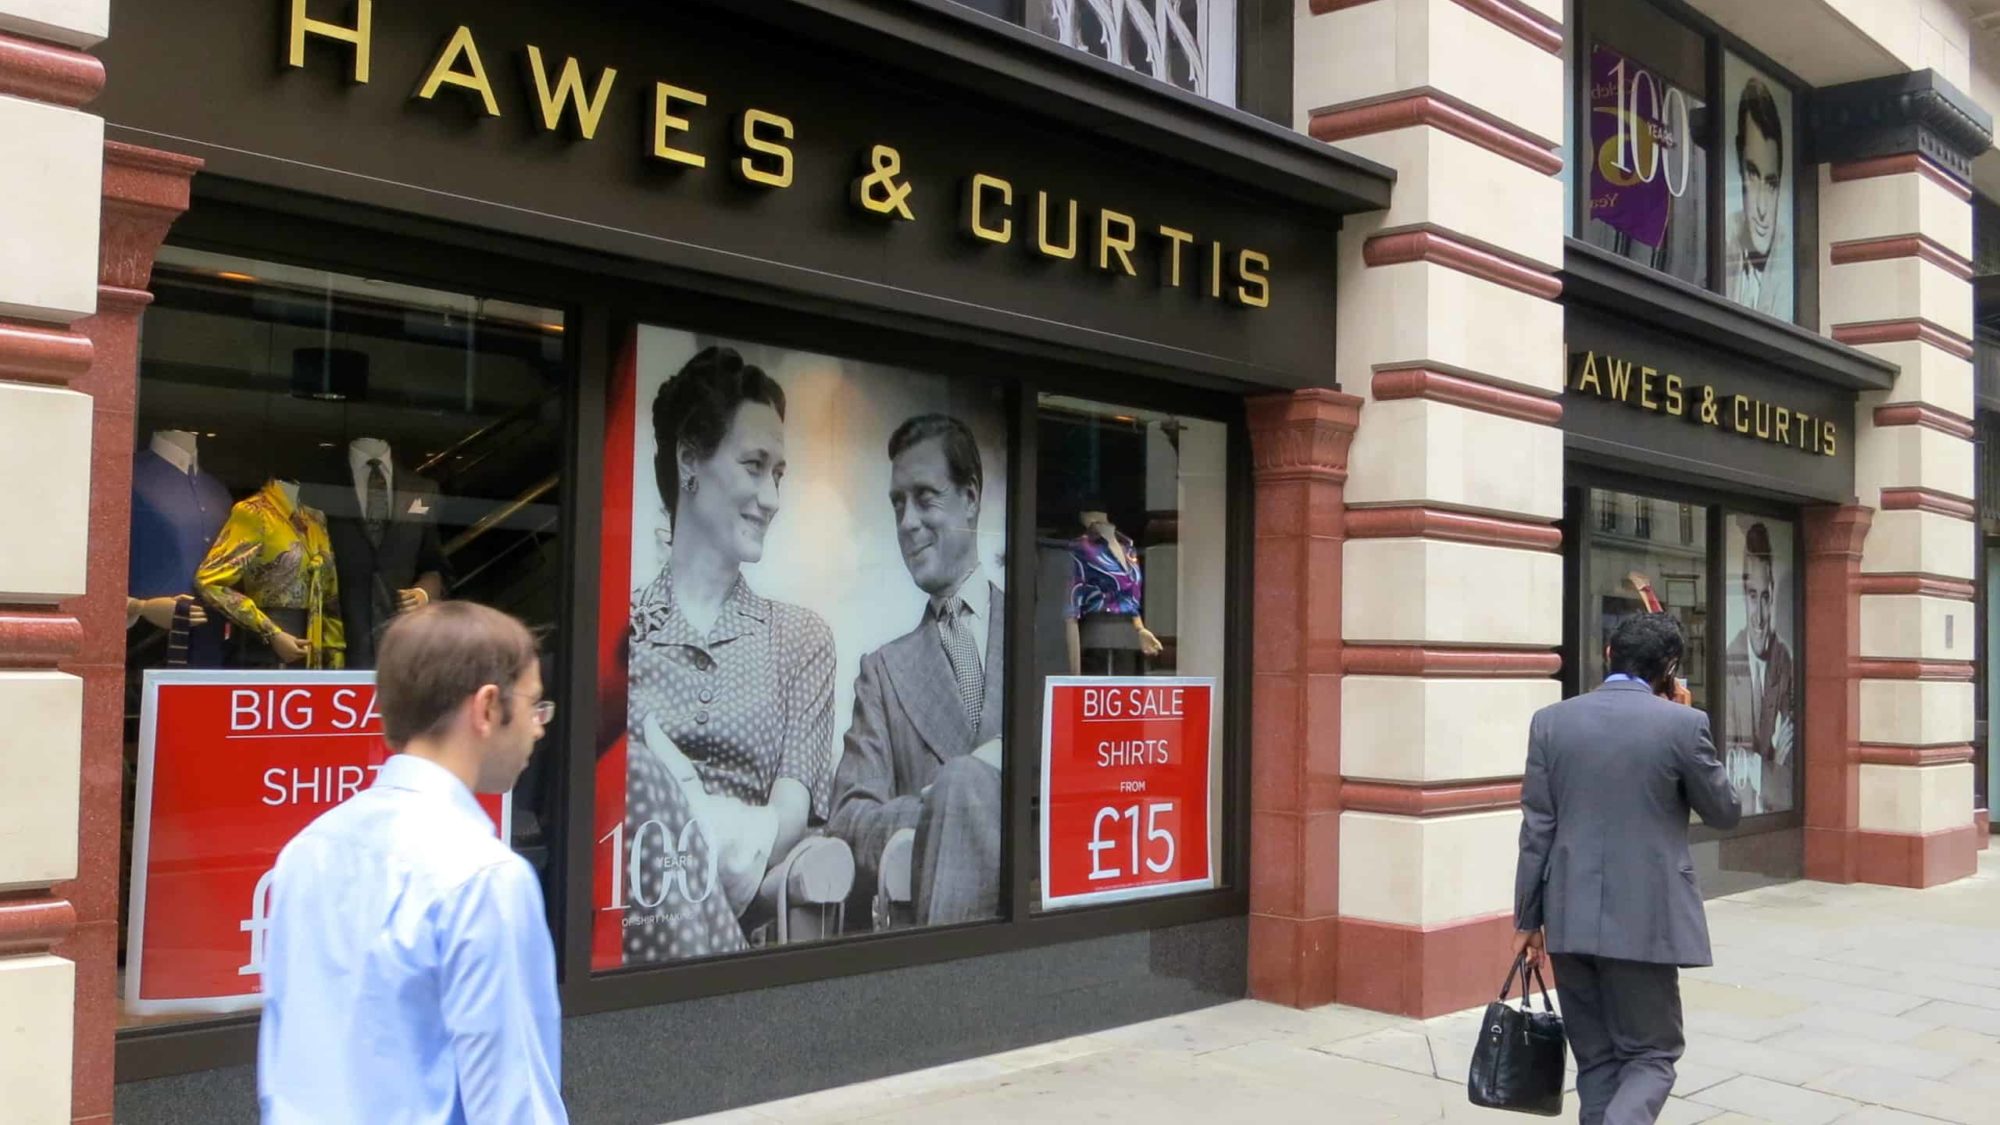 Hawes & Curtis further evolve its digital shopping experience with One iota